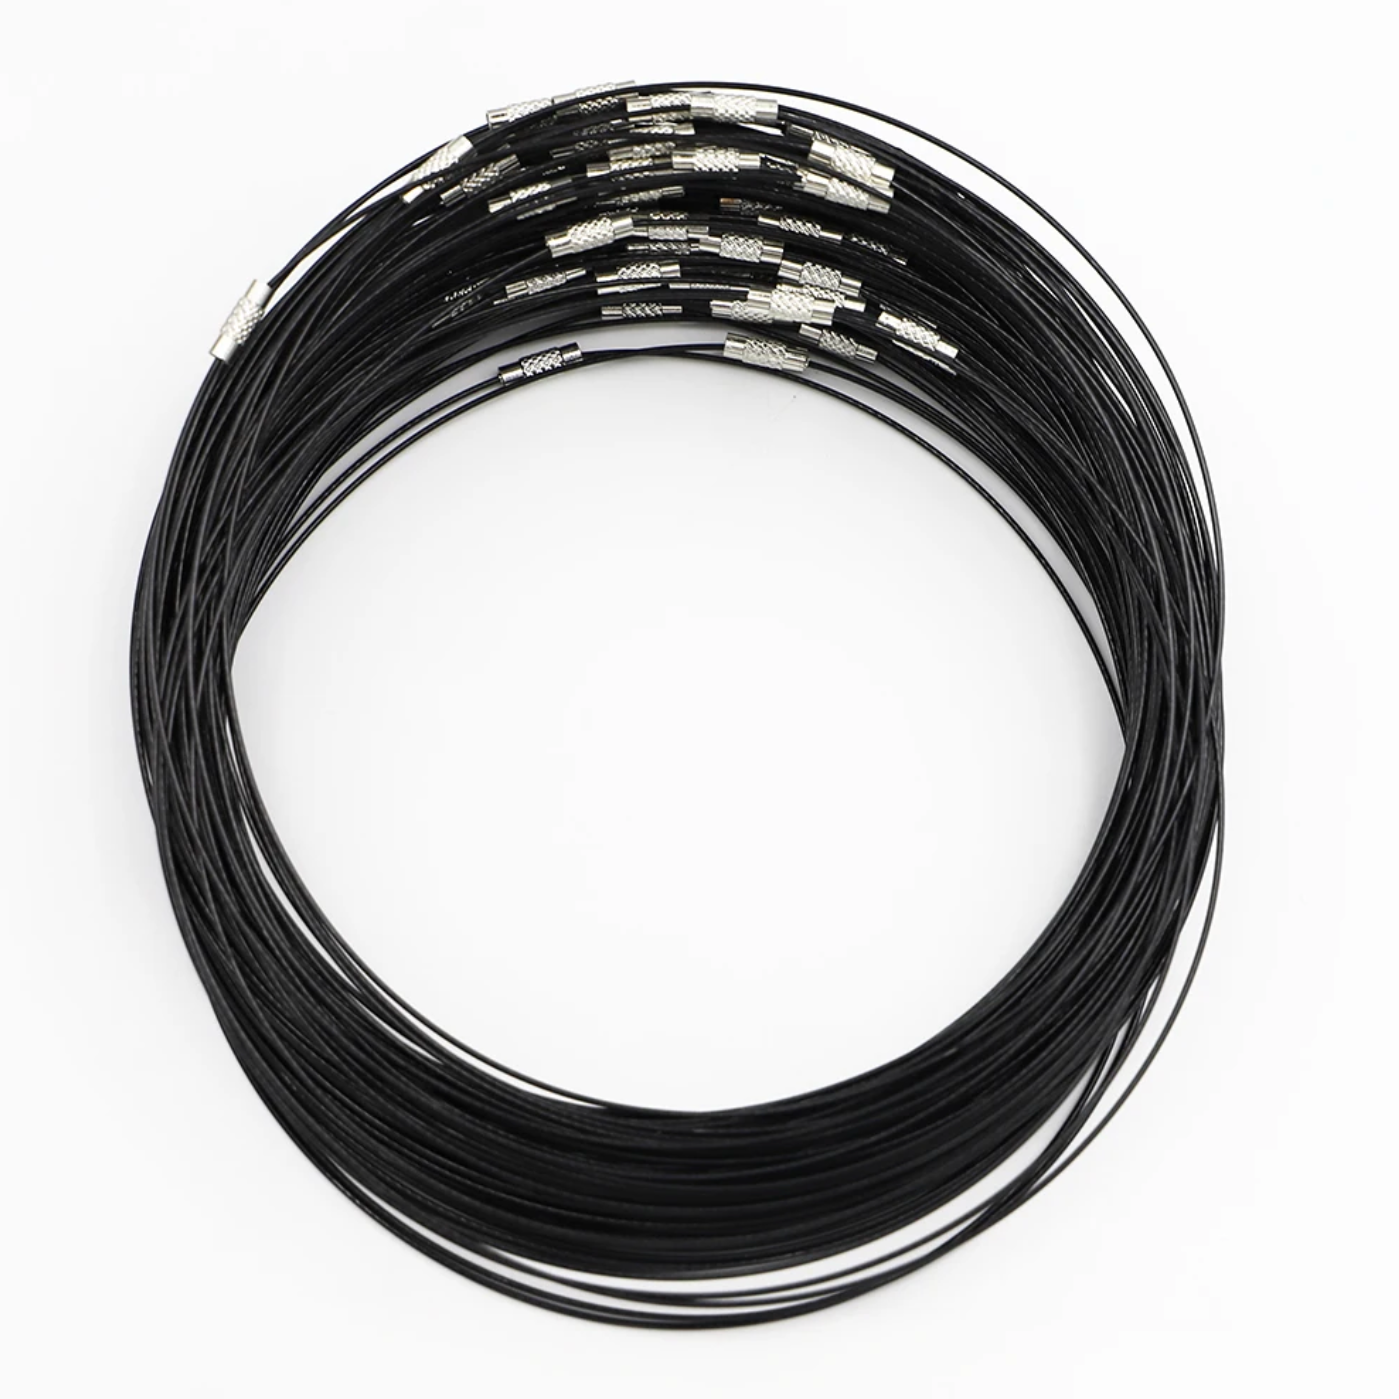 18 Inch Black Steel Wire Necklace Choker with Screw Clasp